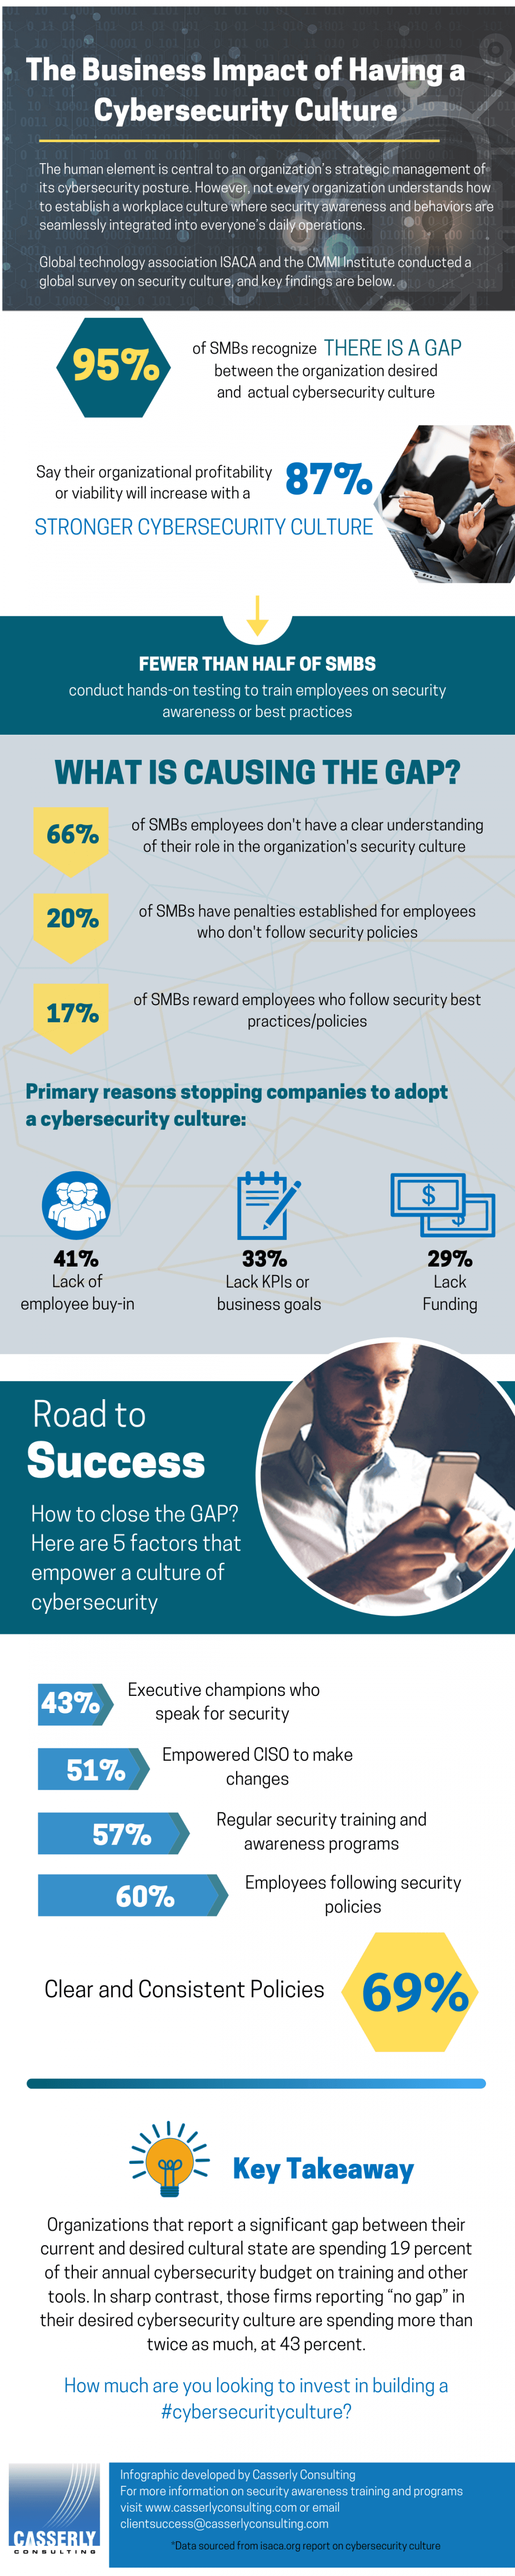 The Business Impact of a Cybersecurity Culture (Infographic) - Casserly ...